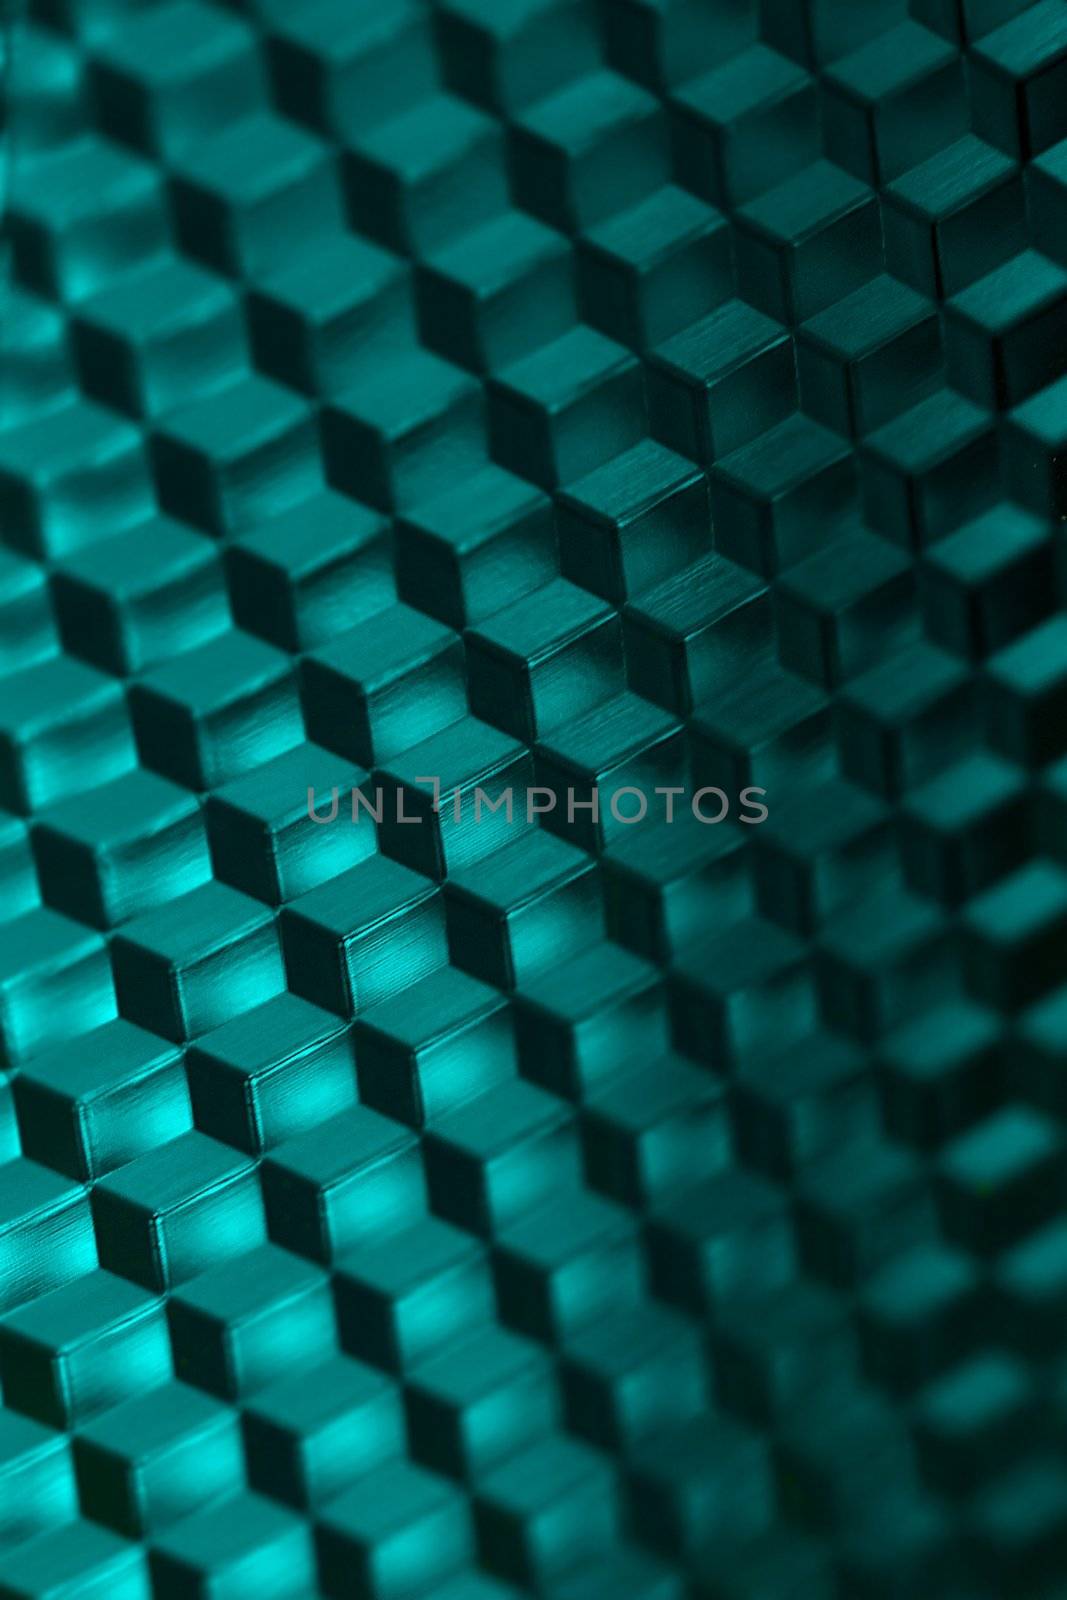 Abstract background pattern with cube shapes